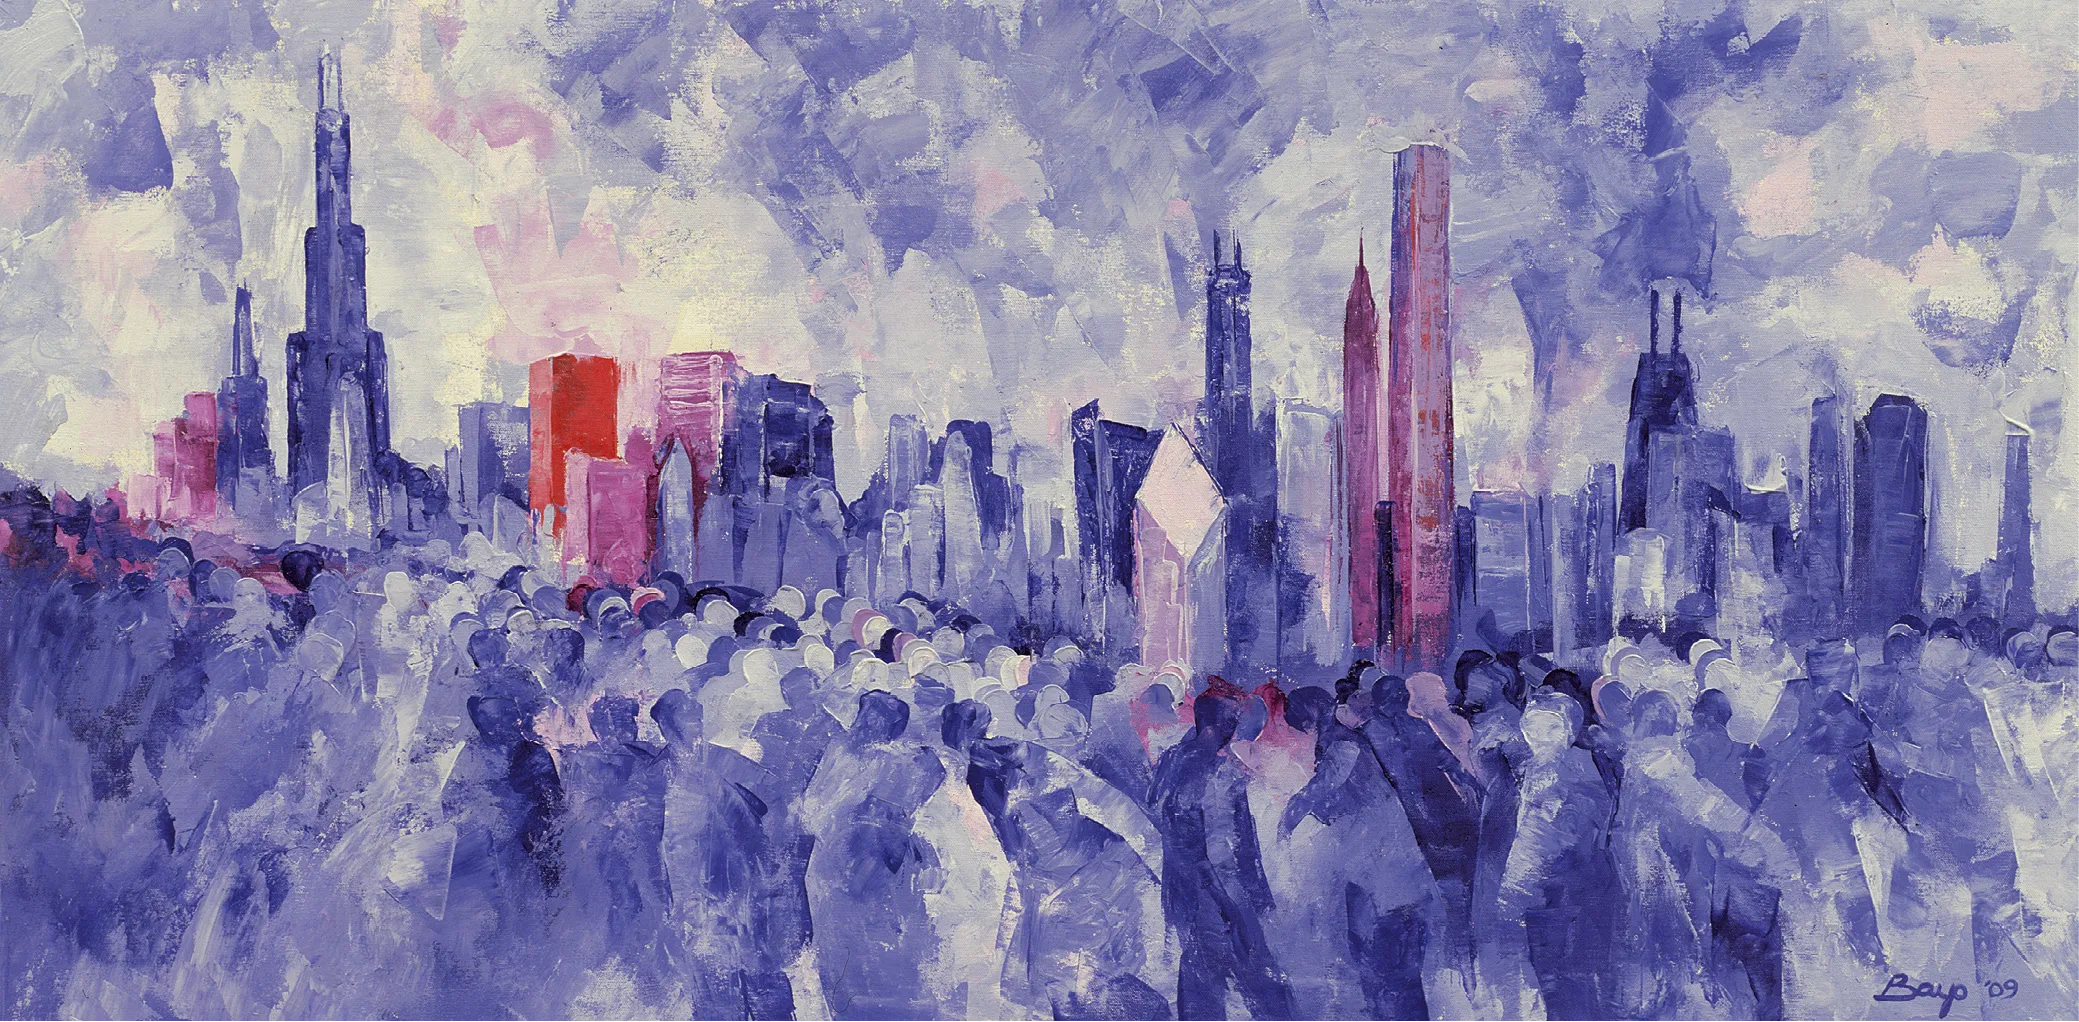 Bayo Iribhogbe, Chicago I, 2009, huile sur toile, 121,9 × 61,9 cm (collection privée).